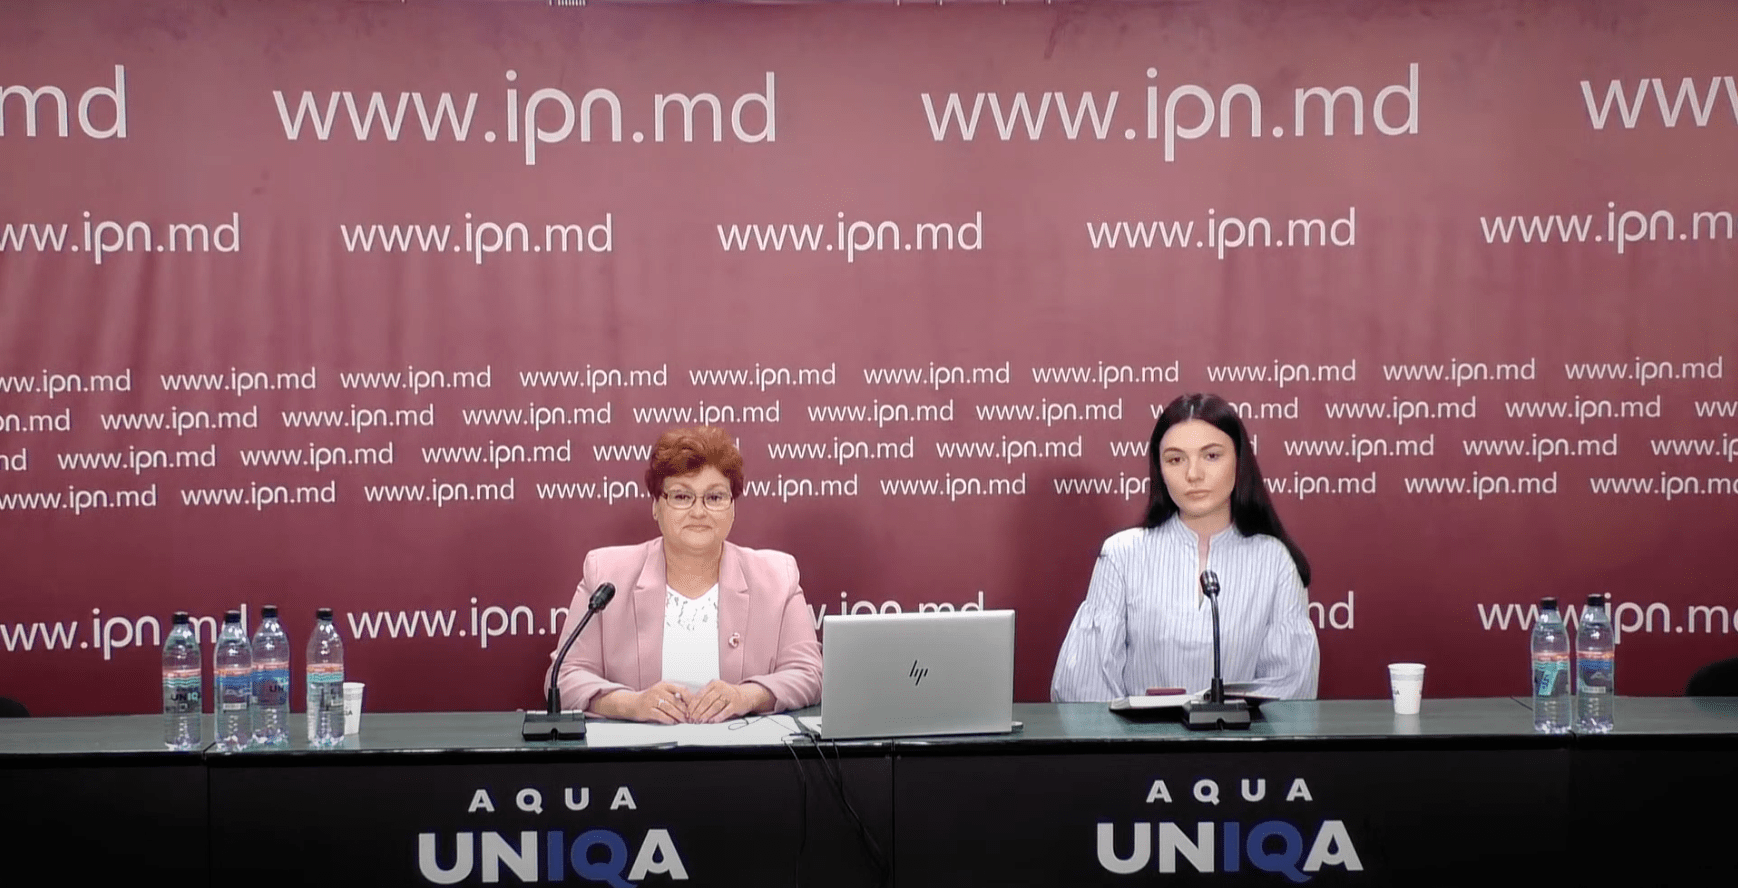 MAIA BĂNĂRESCU: it is anadmissible the USE OF THE CHILDREN IMAGE FOR POLITICAL AND ELECTORAL PURPOSEs